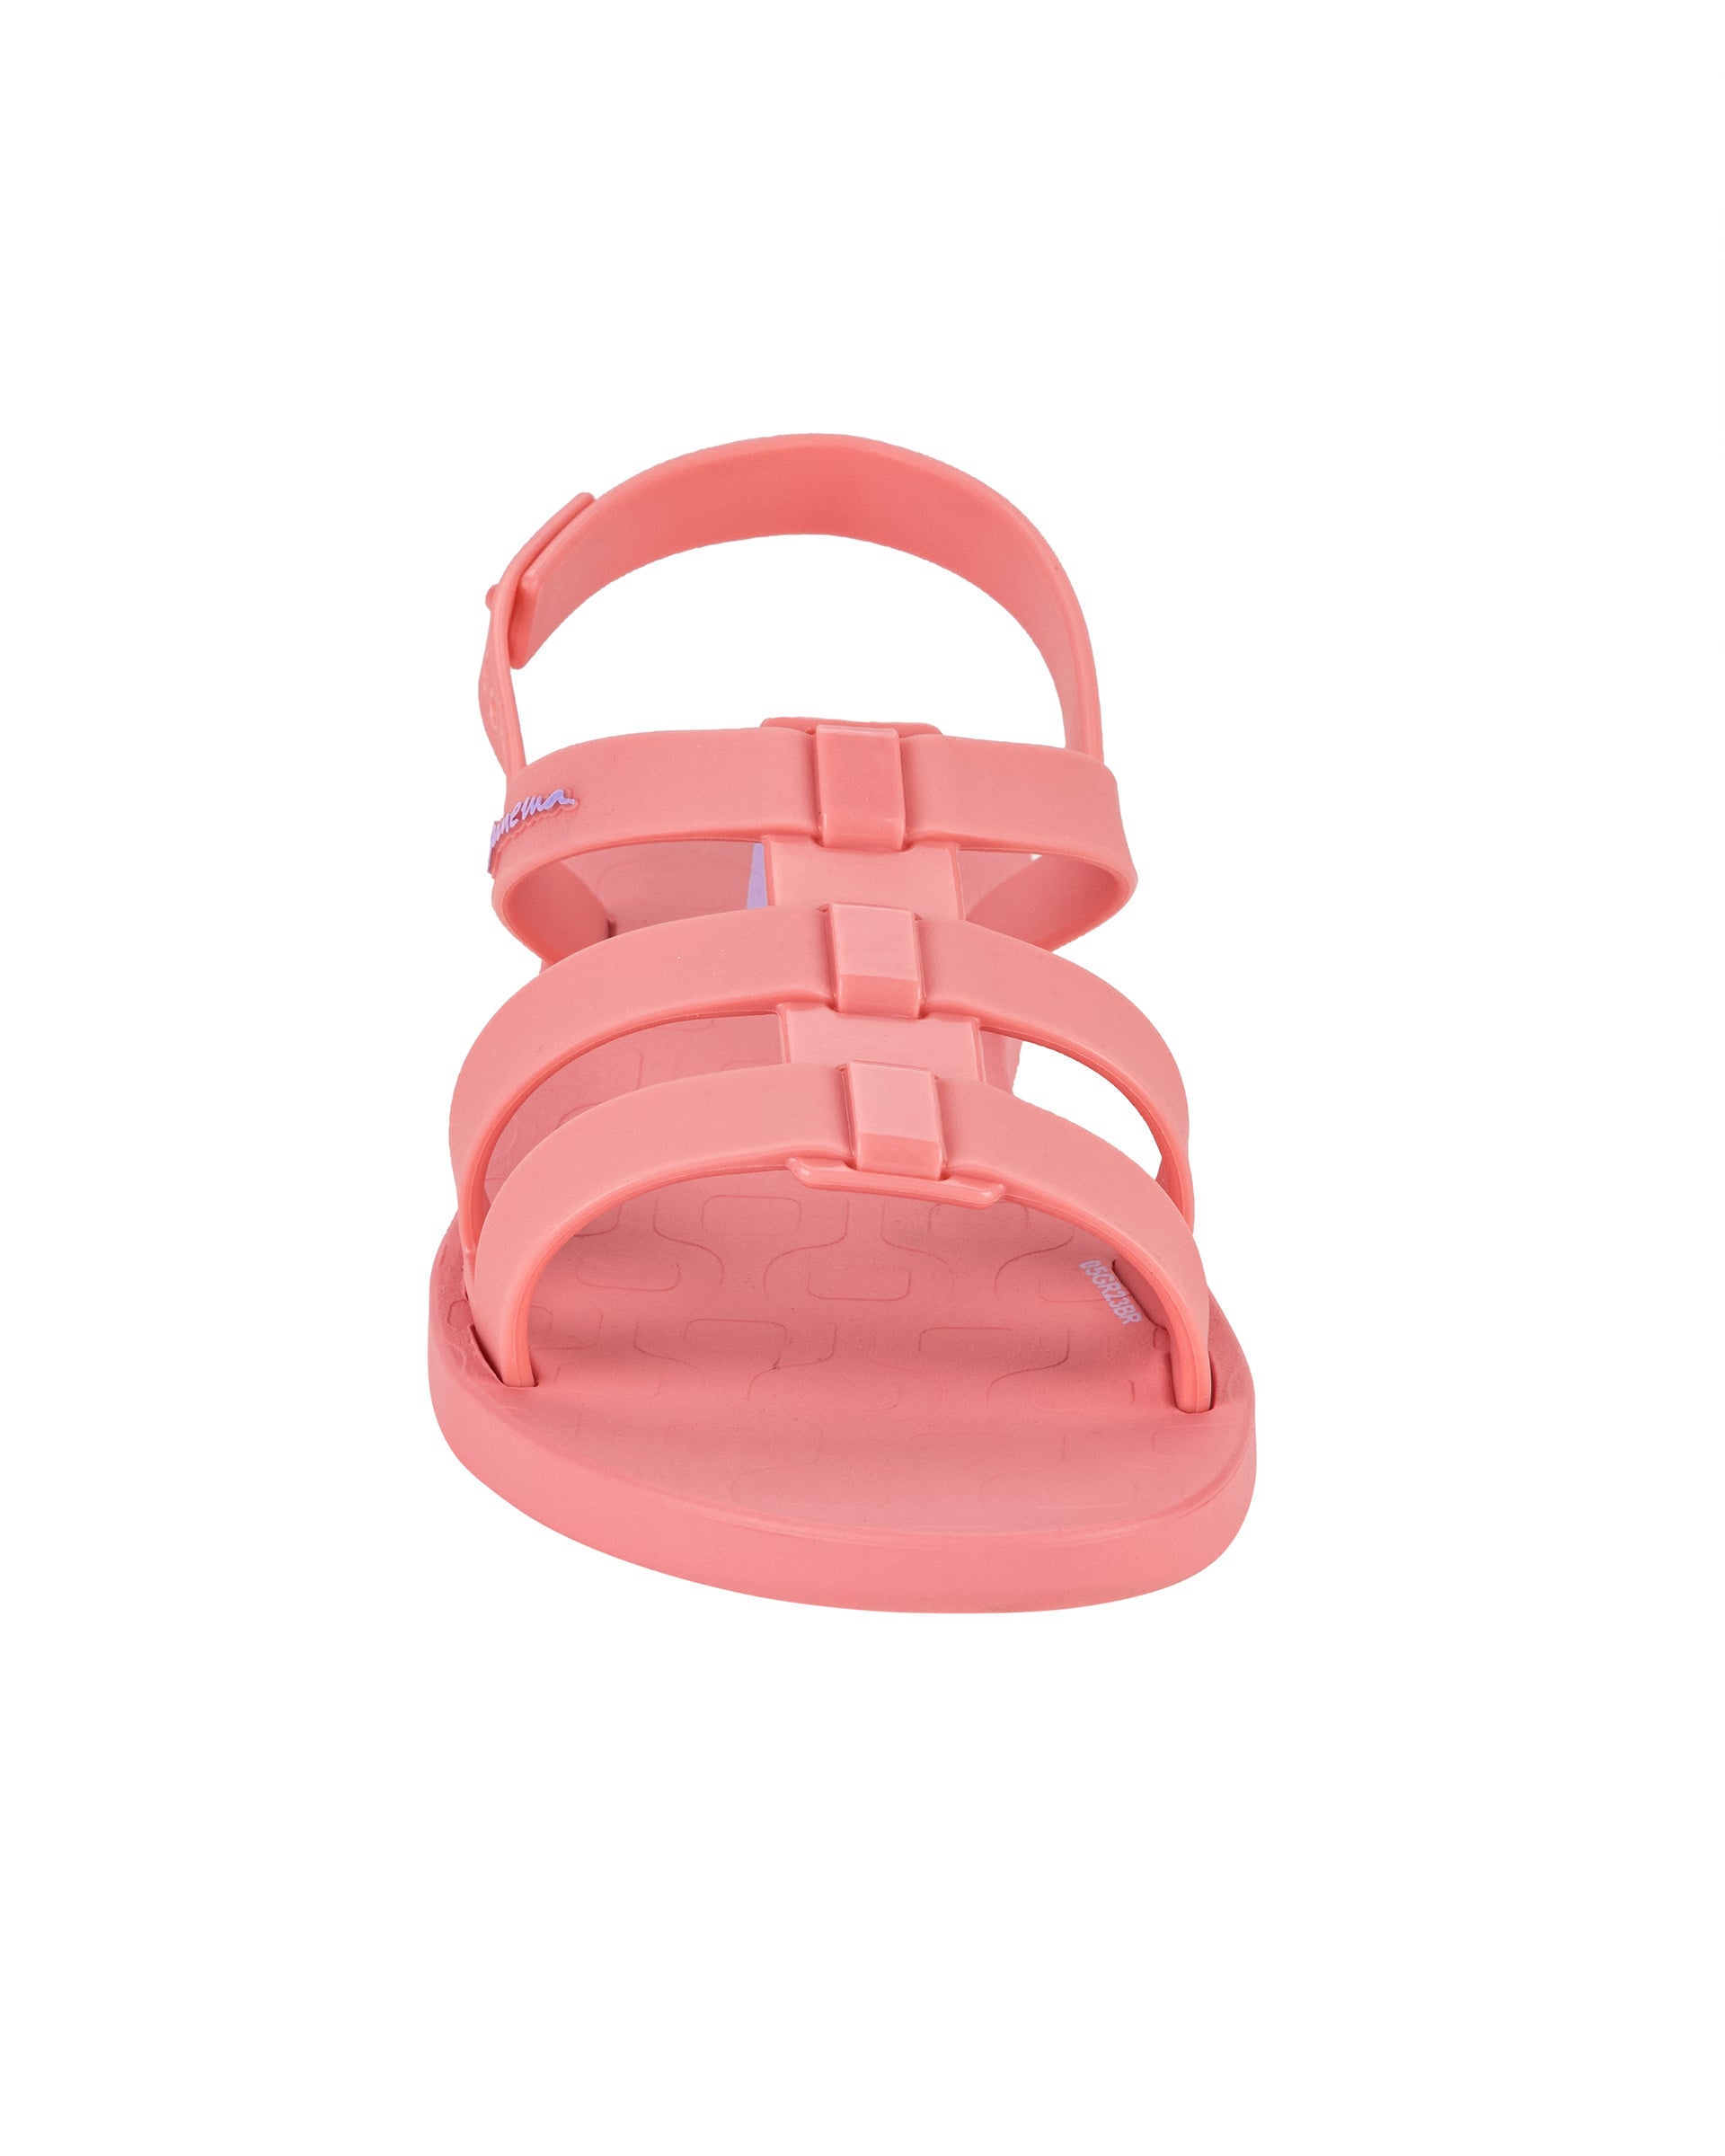 Front view of a pink Ipanema Class Go women's sandal.